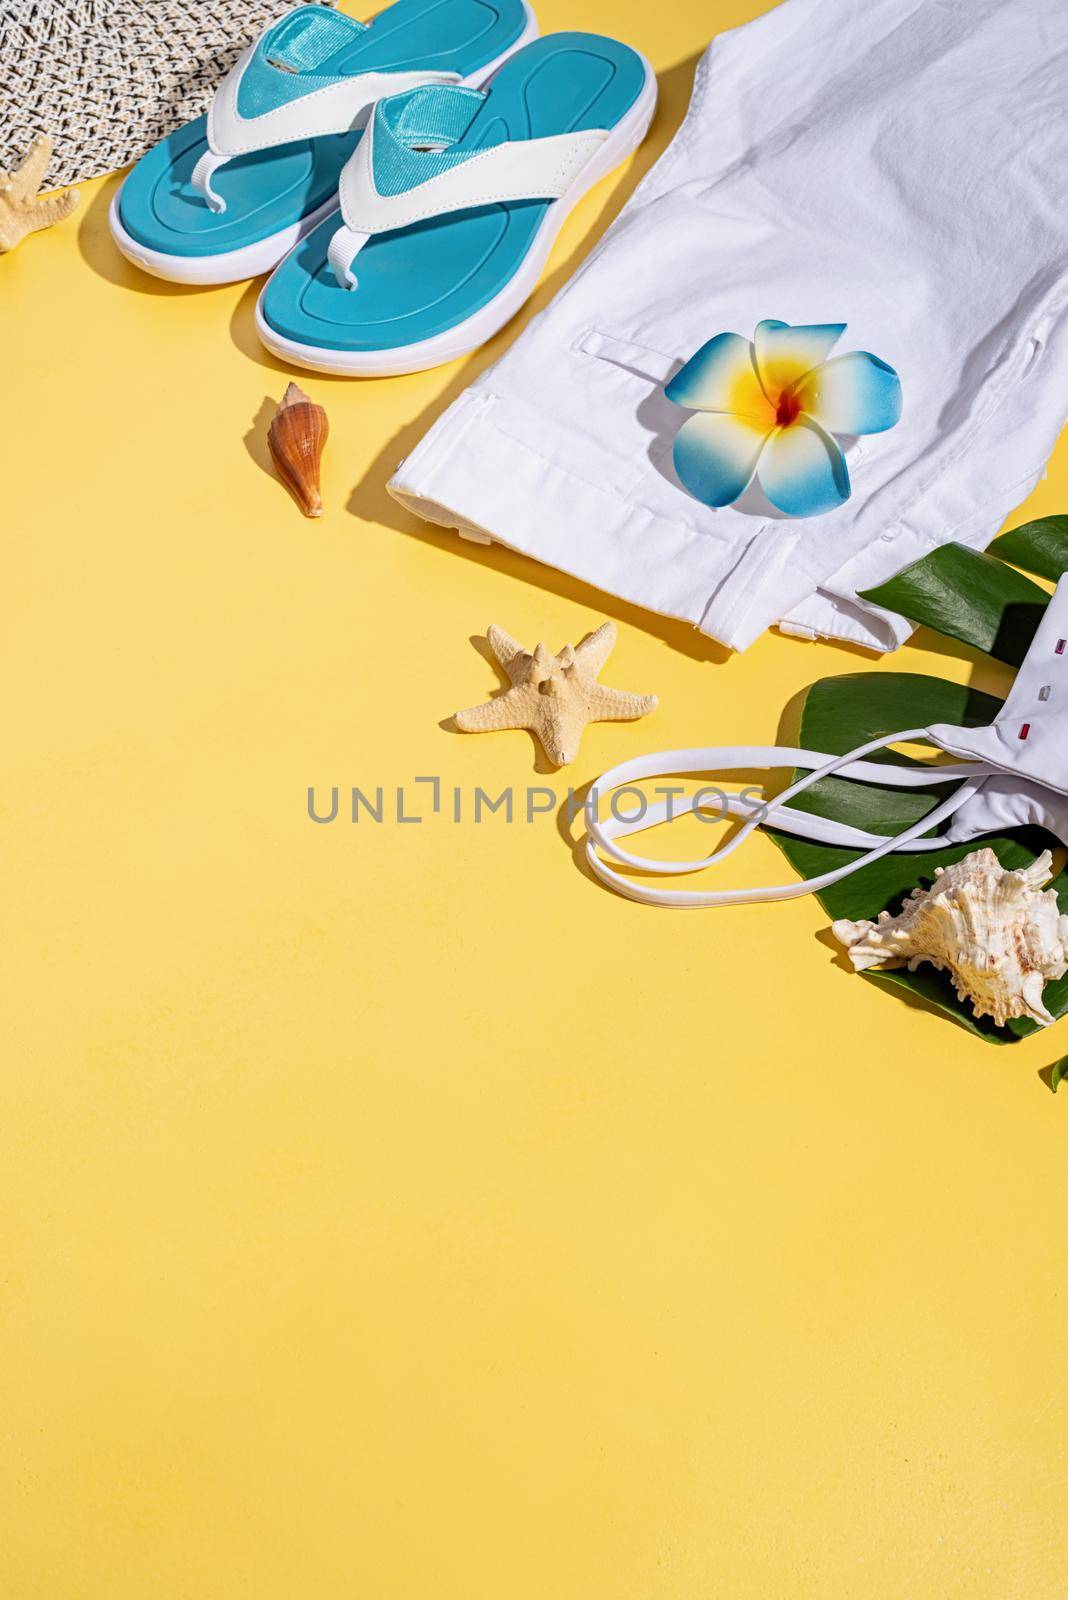 Summer and vacation concept. summer accessories with clothes, shoes, tropical leaves and flowers, flat lay